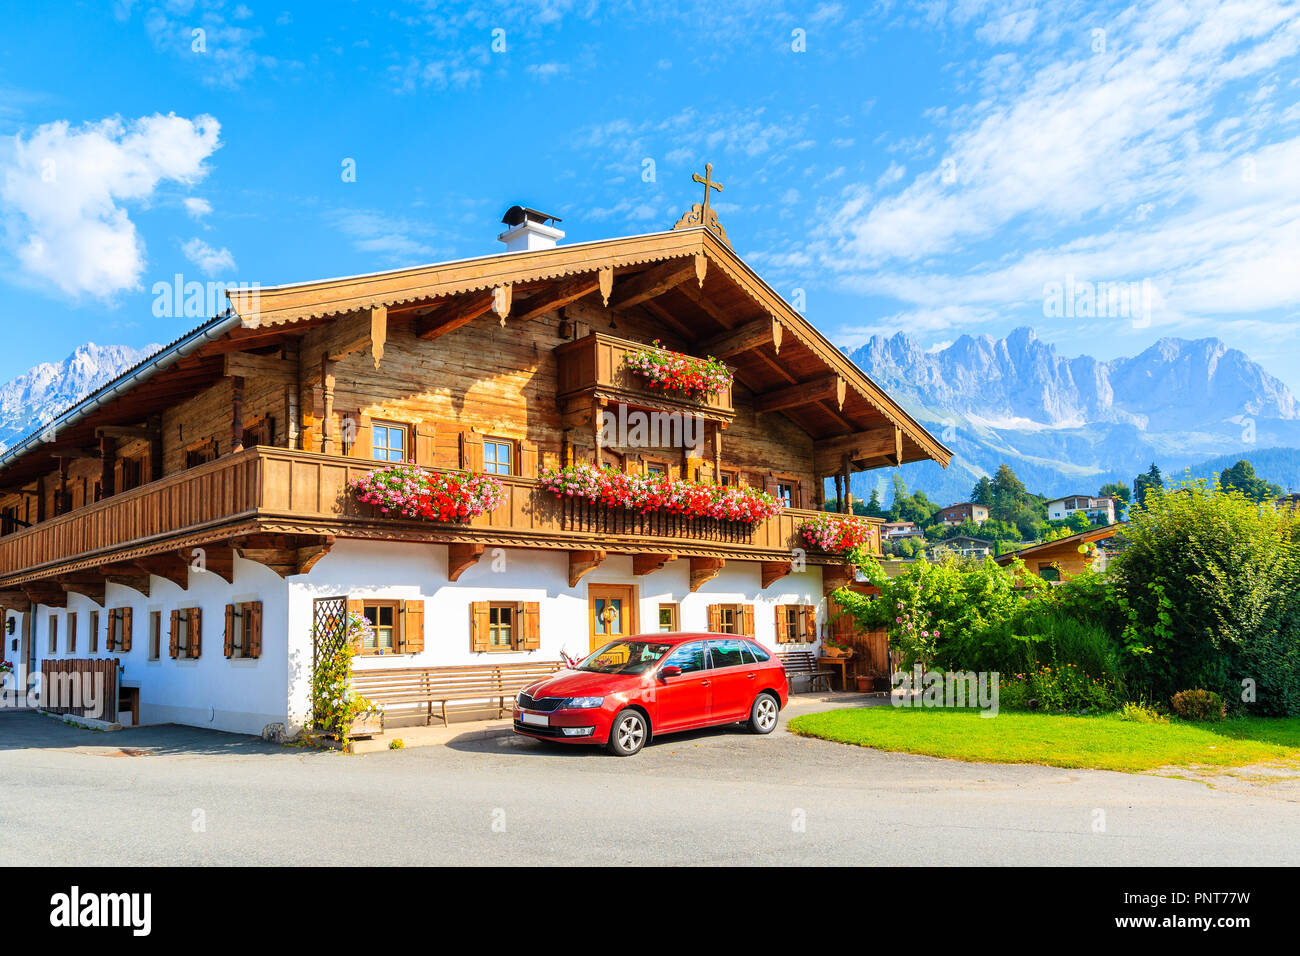 Traditional wooden alpine house decorated with flowers in Going am Wilden Kaiser mountain village on sunny summer day, Tyrol, Austria Stock Photo